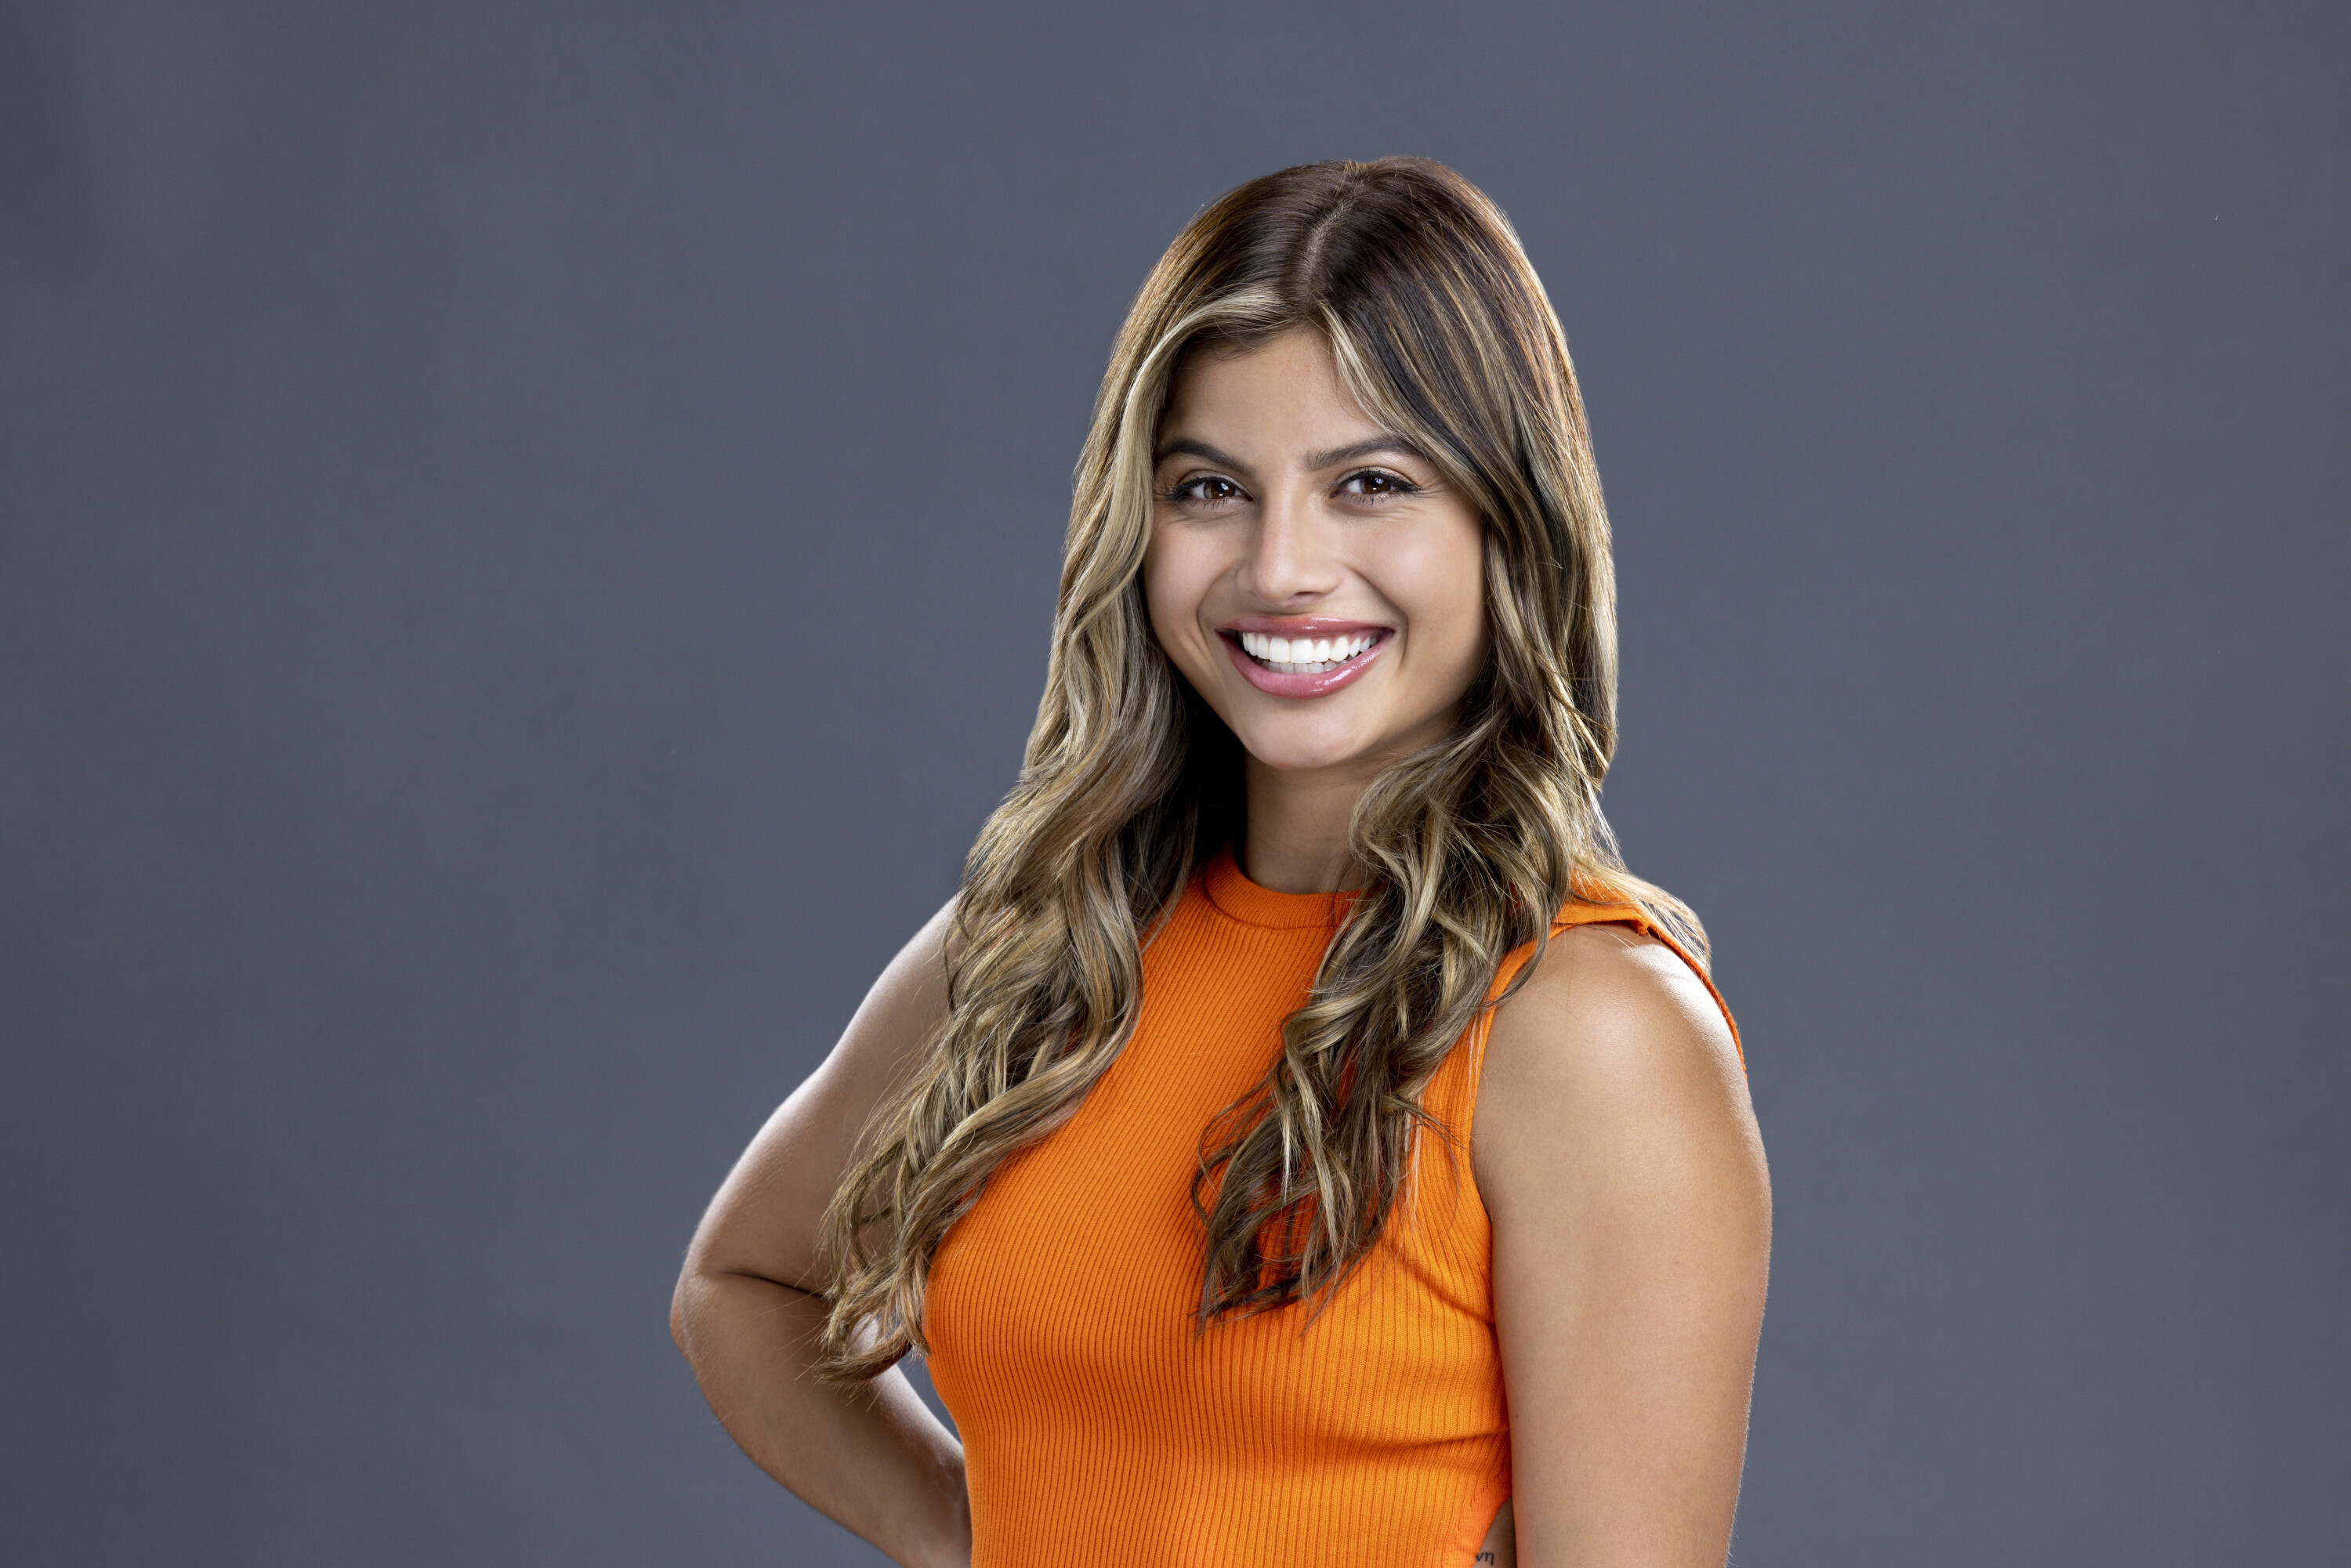 Paloma Aguilar, who competed in 'Big Brother 24,' wears an orange tank top.